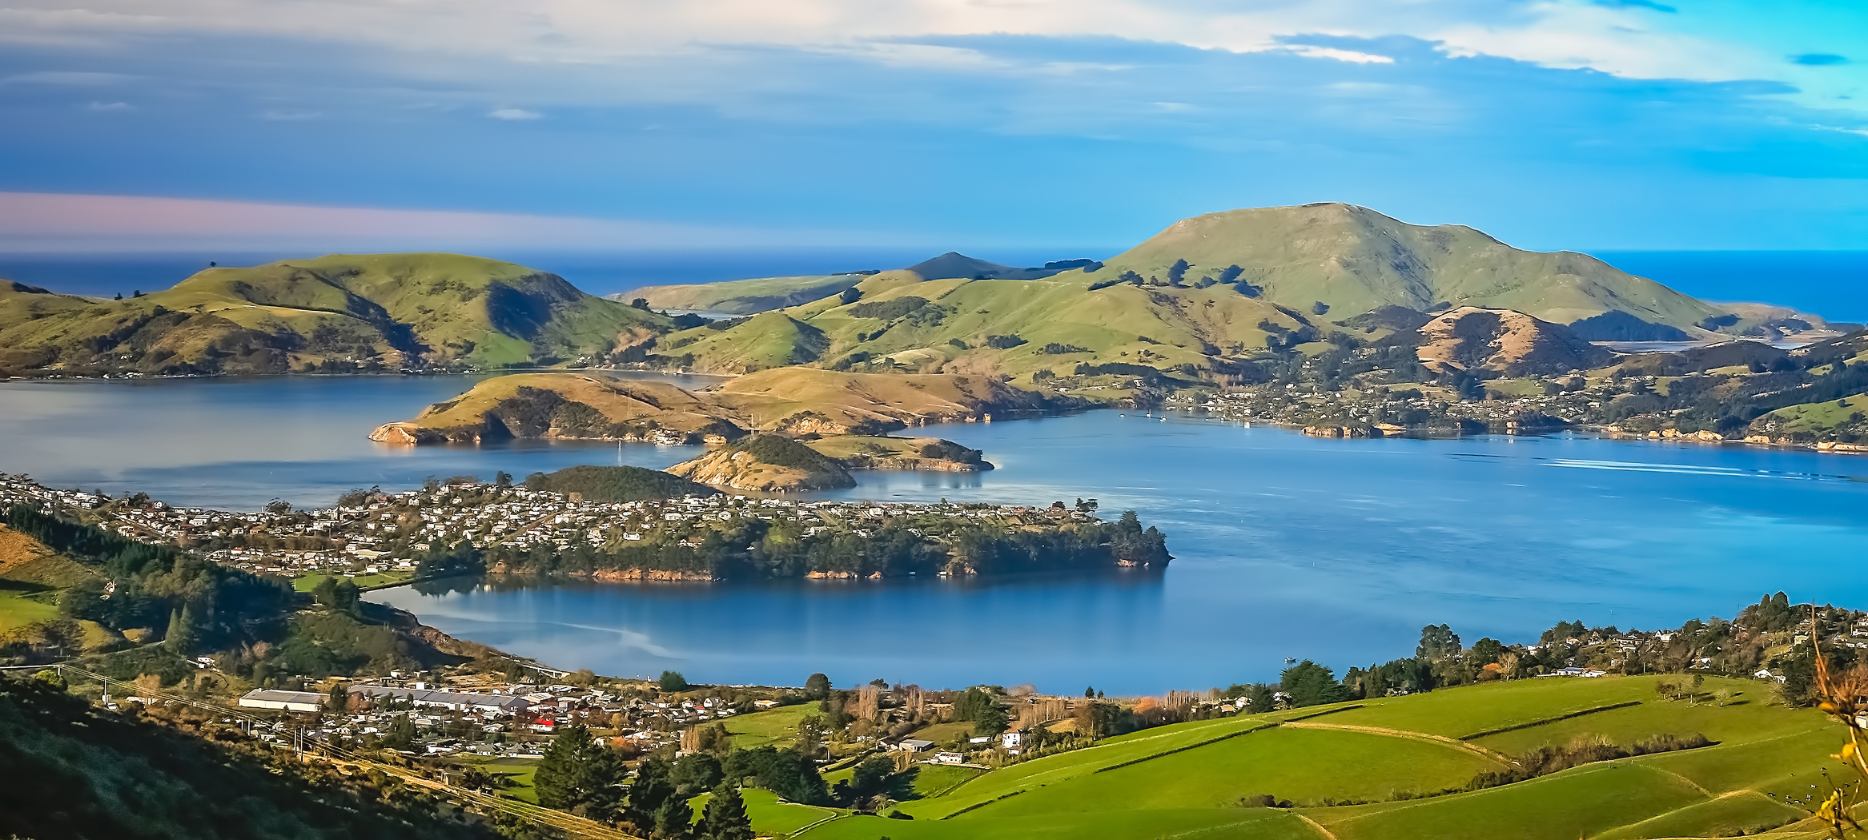 House Price Index shows NZ housing downturn deepens – rate of fall comparable to depths of GFC